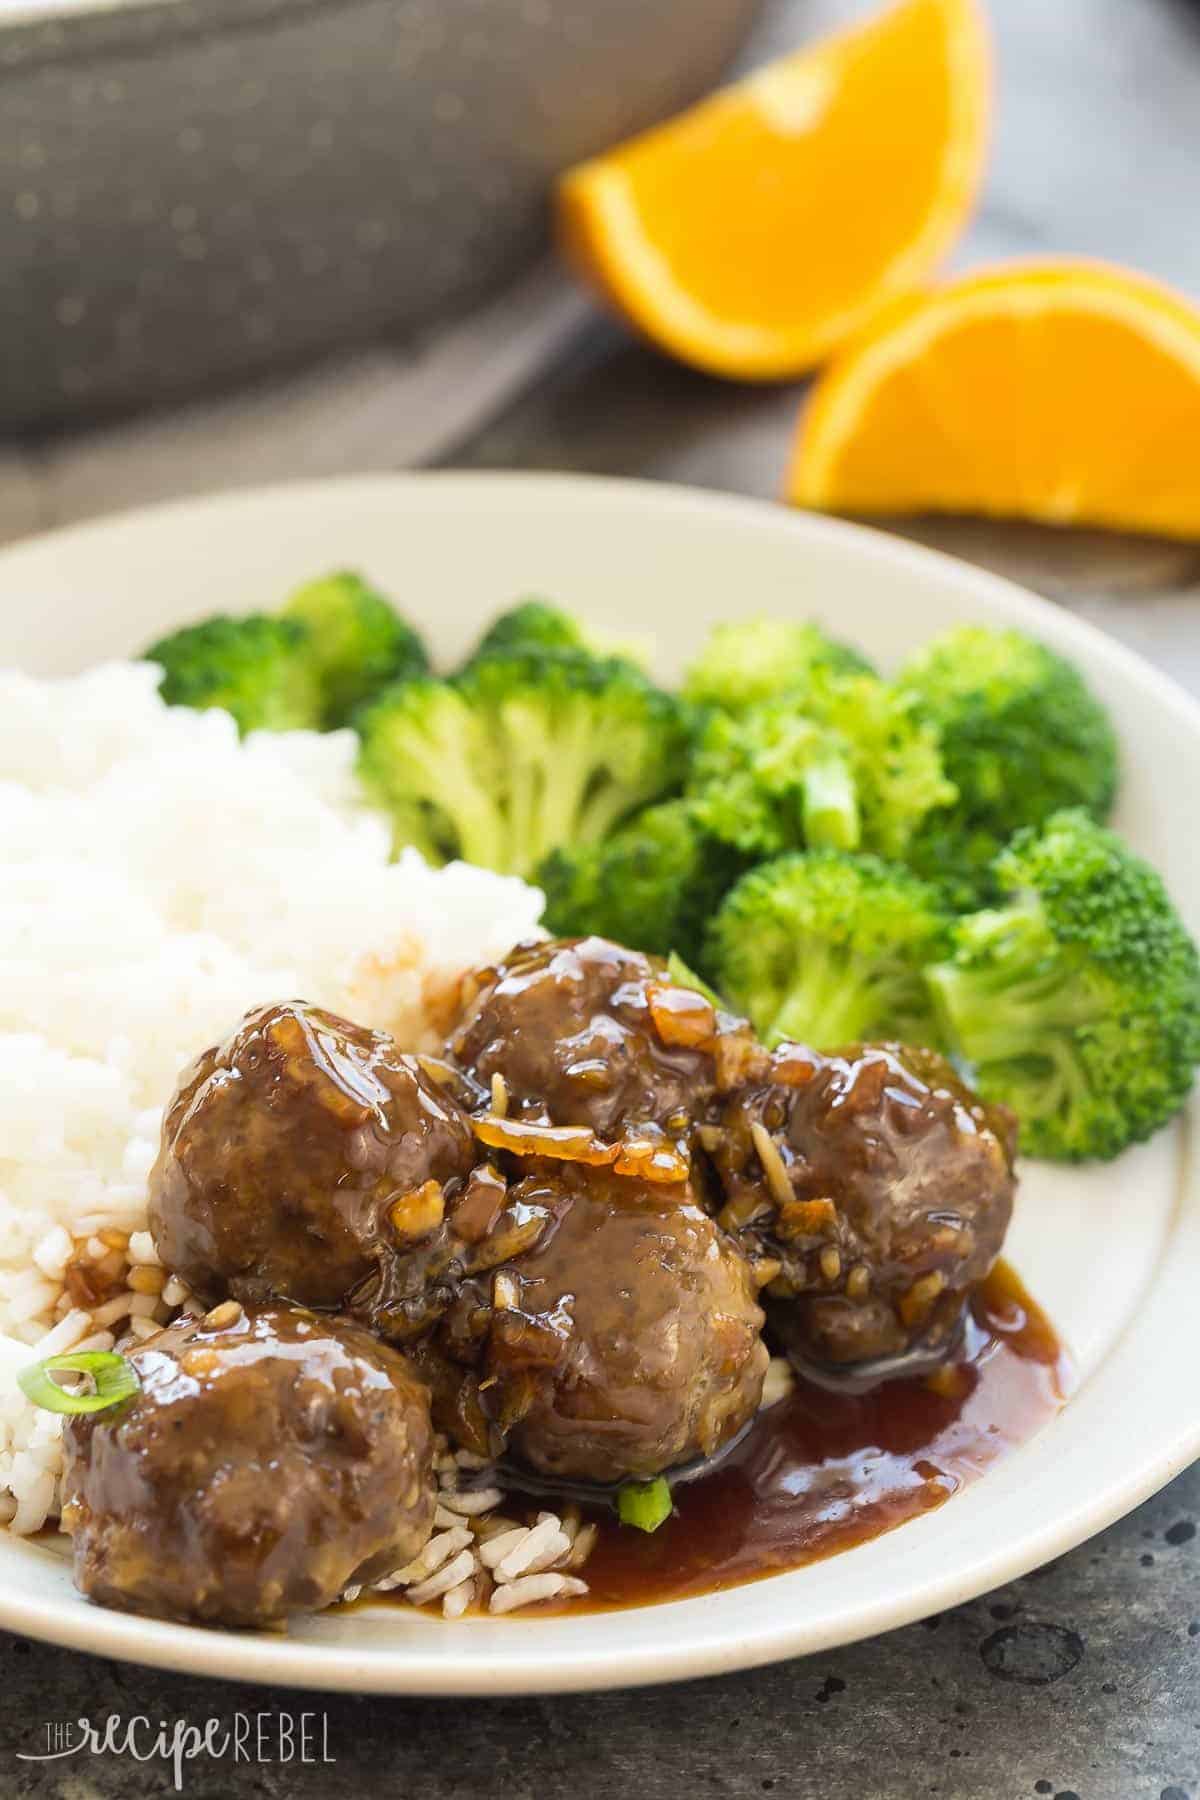 grey plate with meatballs and orange sauce over rice with broccoli